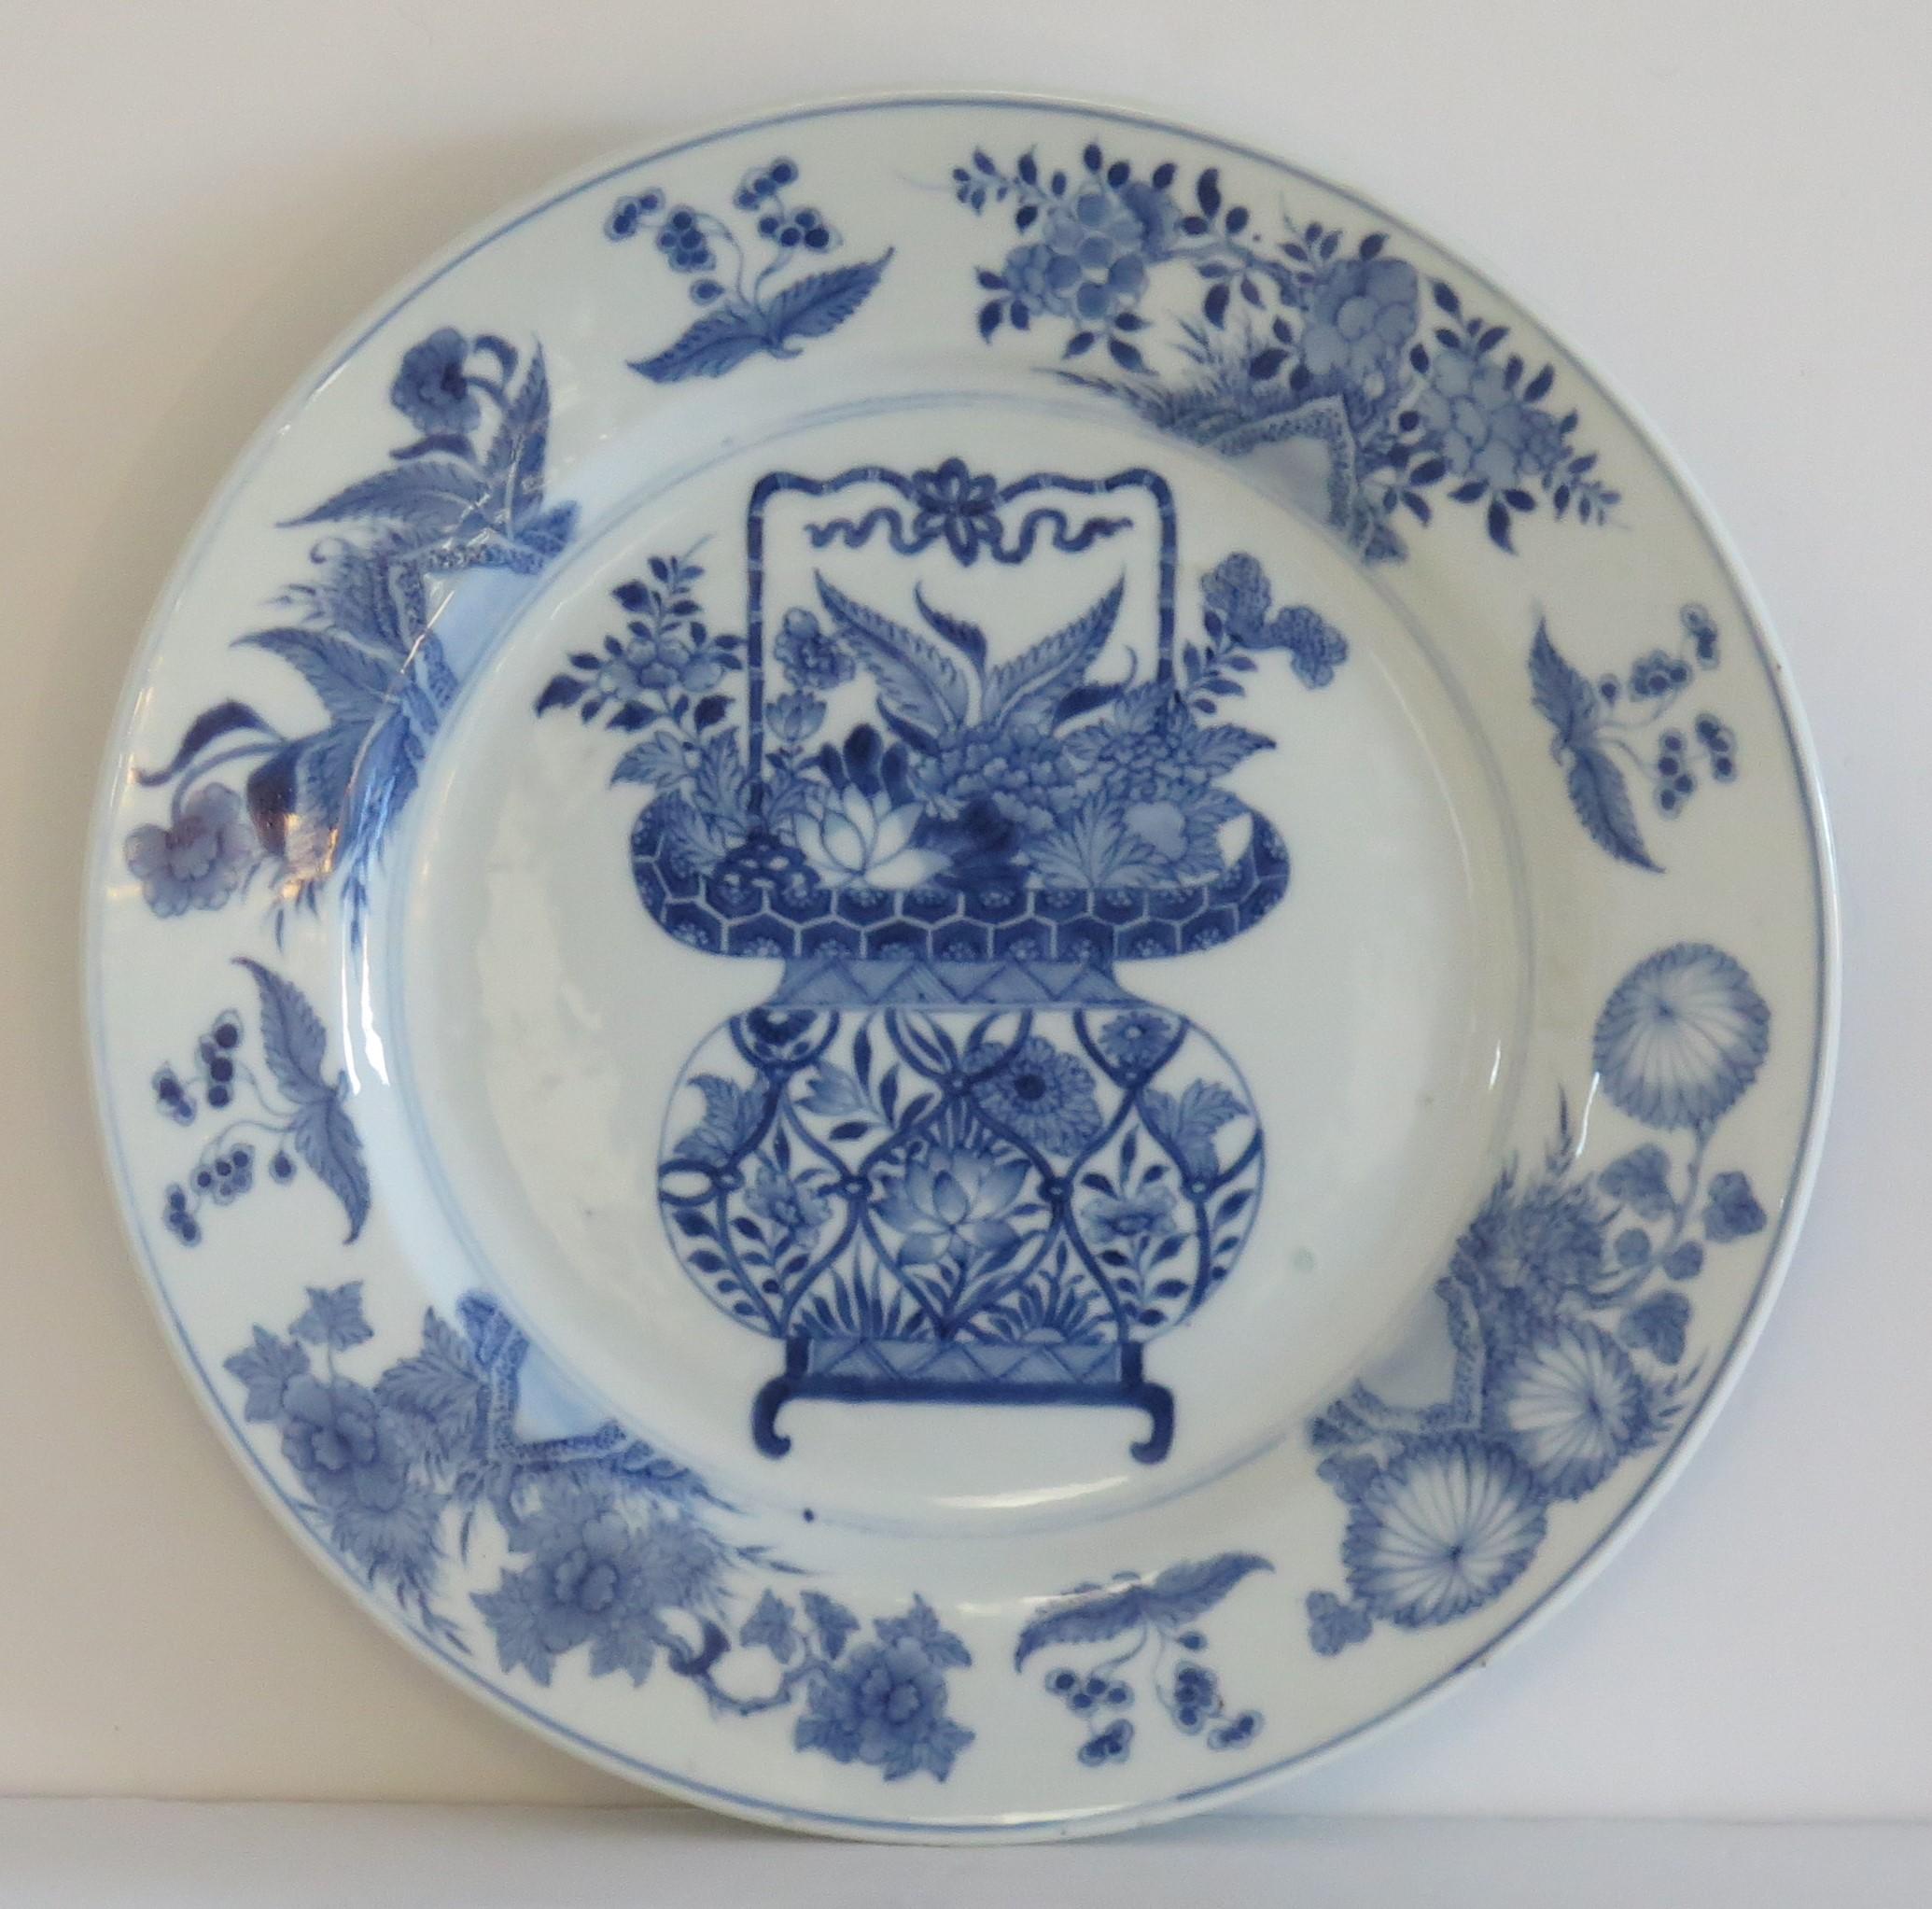 This is a beautifully hand-painted Chinese porcelain blue and white large plate from the Qing, Kangxi period, 1662-1722.

The plate is finely potted with a carefully cut base rim and a lovely rich glassy, very light blue glaze.

This is a large